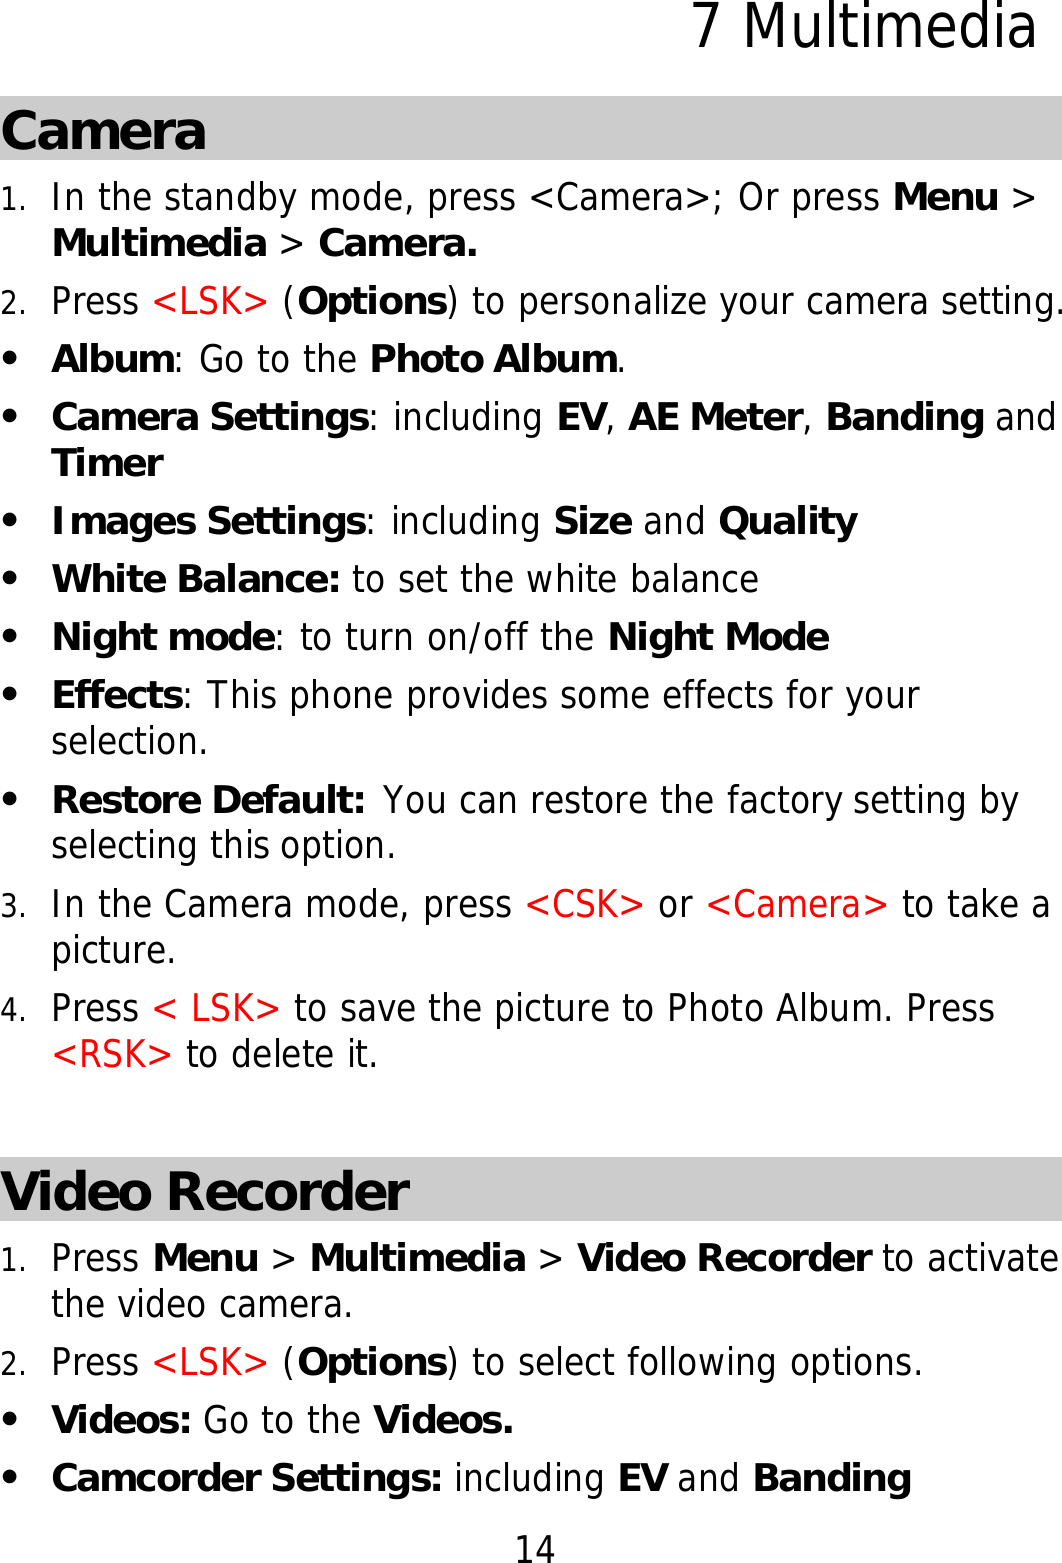 14 7 Multimedia Camera 1. In the standby mode, press &lt;Camera&gt;; Or press Menu &gt; Multimedia &gt; Camera. 2. Press &lt;LSK&gt; (Options) to personalize your camera setting. z Album: Go to the Photo Album. z Camera Settings: including EV, AE Meter, Banding and Timer z Images Settings: including Size and Quality z White Balance: to set the white balance z Night mode: to turn on/off the Night Mode z Effects: This phone provides some effects for your selection.  z Restore Default: You can restore the factory setting by selecting this option. 3. In the Camera mode, press &lt;CSK&gt; or &lt;Camera&gt; to take a picture. 4. Press &lt; LSK&gt; to save the picture to Photo Album. Press &lt;RSK&gt; to delete it.   Video Recorder 1. Press Menu &gt; Multimedia &gt; Video Recorder to activate the video camera. 2. Press &lt;LSK&gt; (Options) to select following options. z Videos: Go to the Videos. z Camcorder Settings: including EV and Banding 